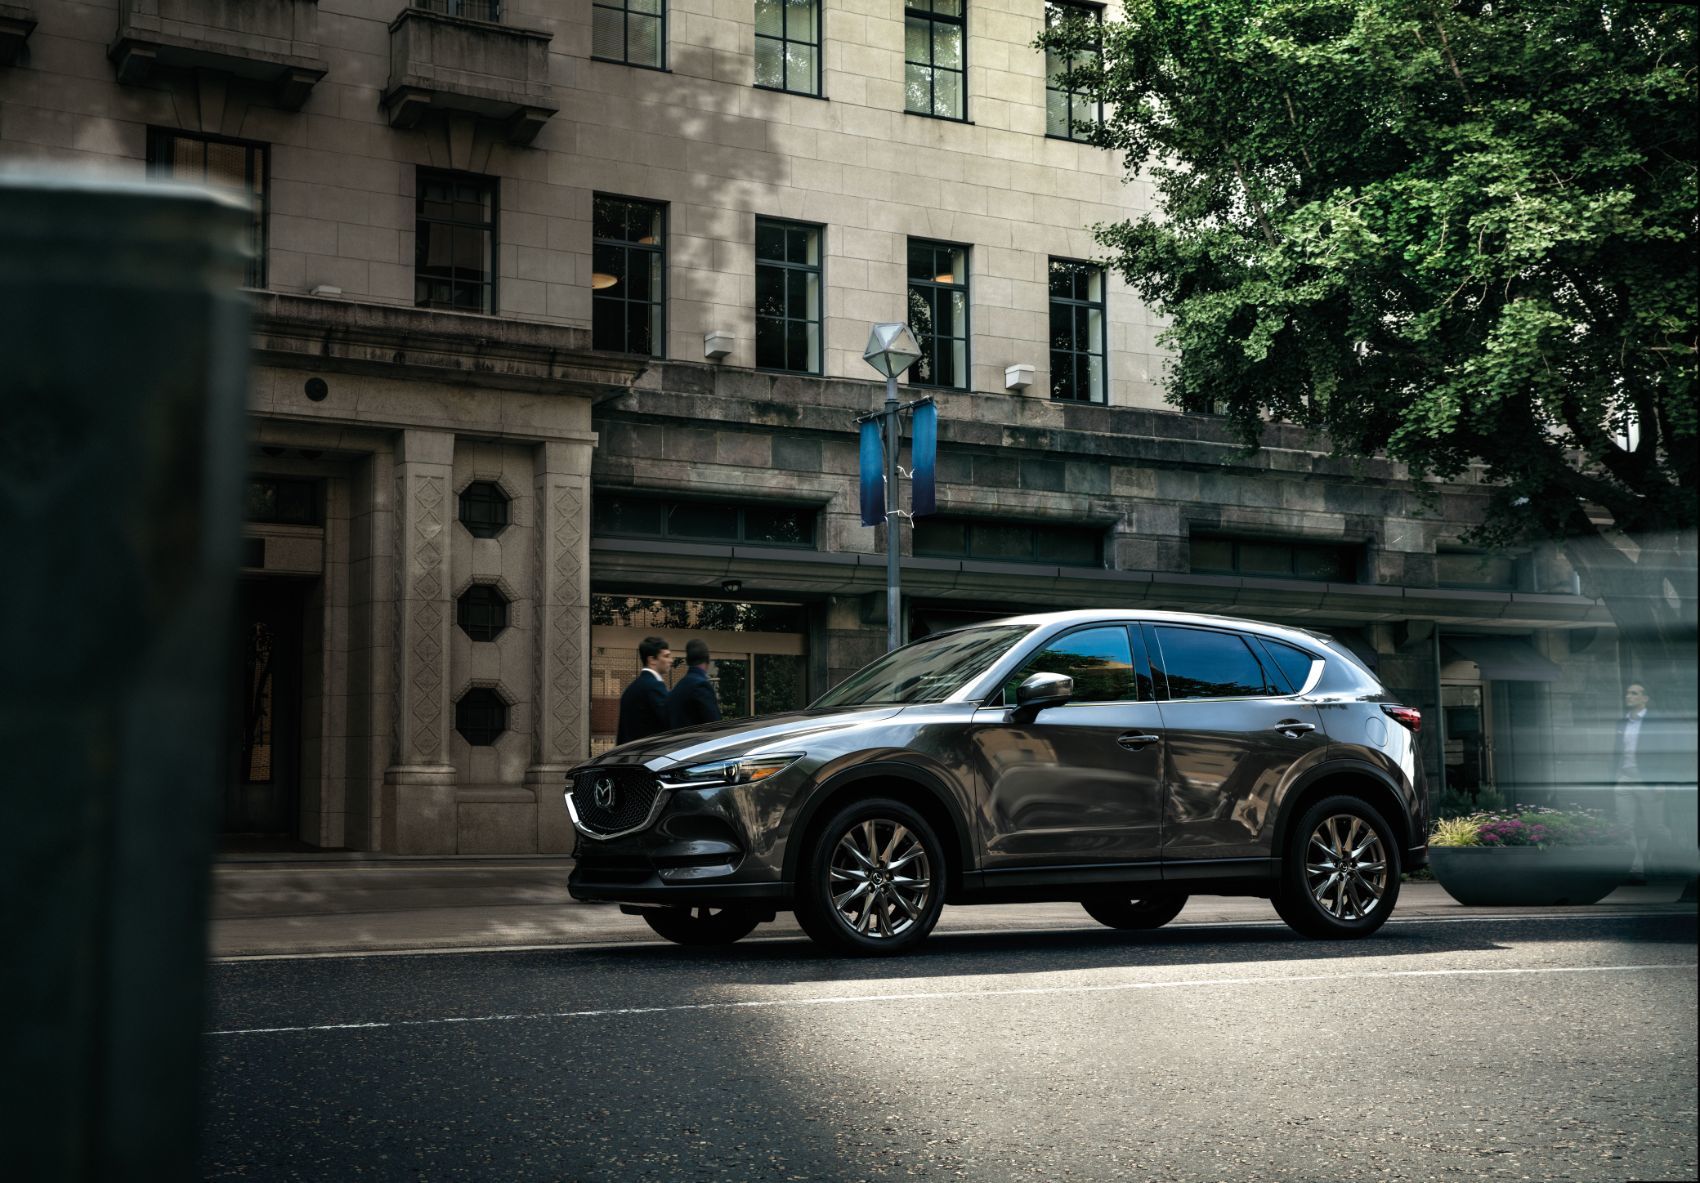 2021 Mazda CX-5: A Complete Look At The Pricing & Trim Levels